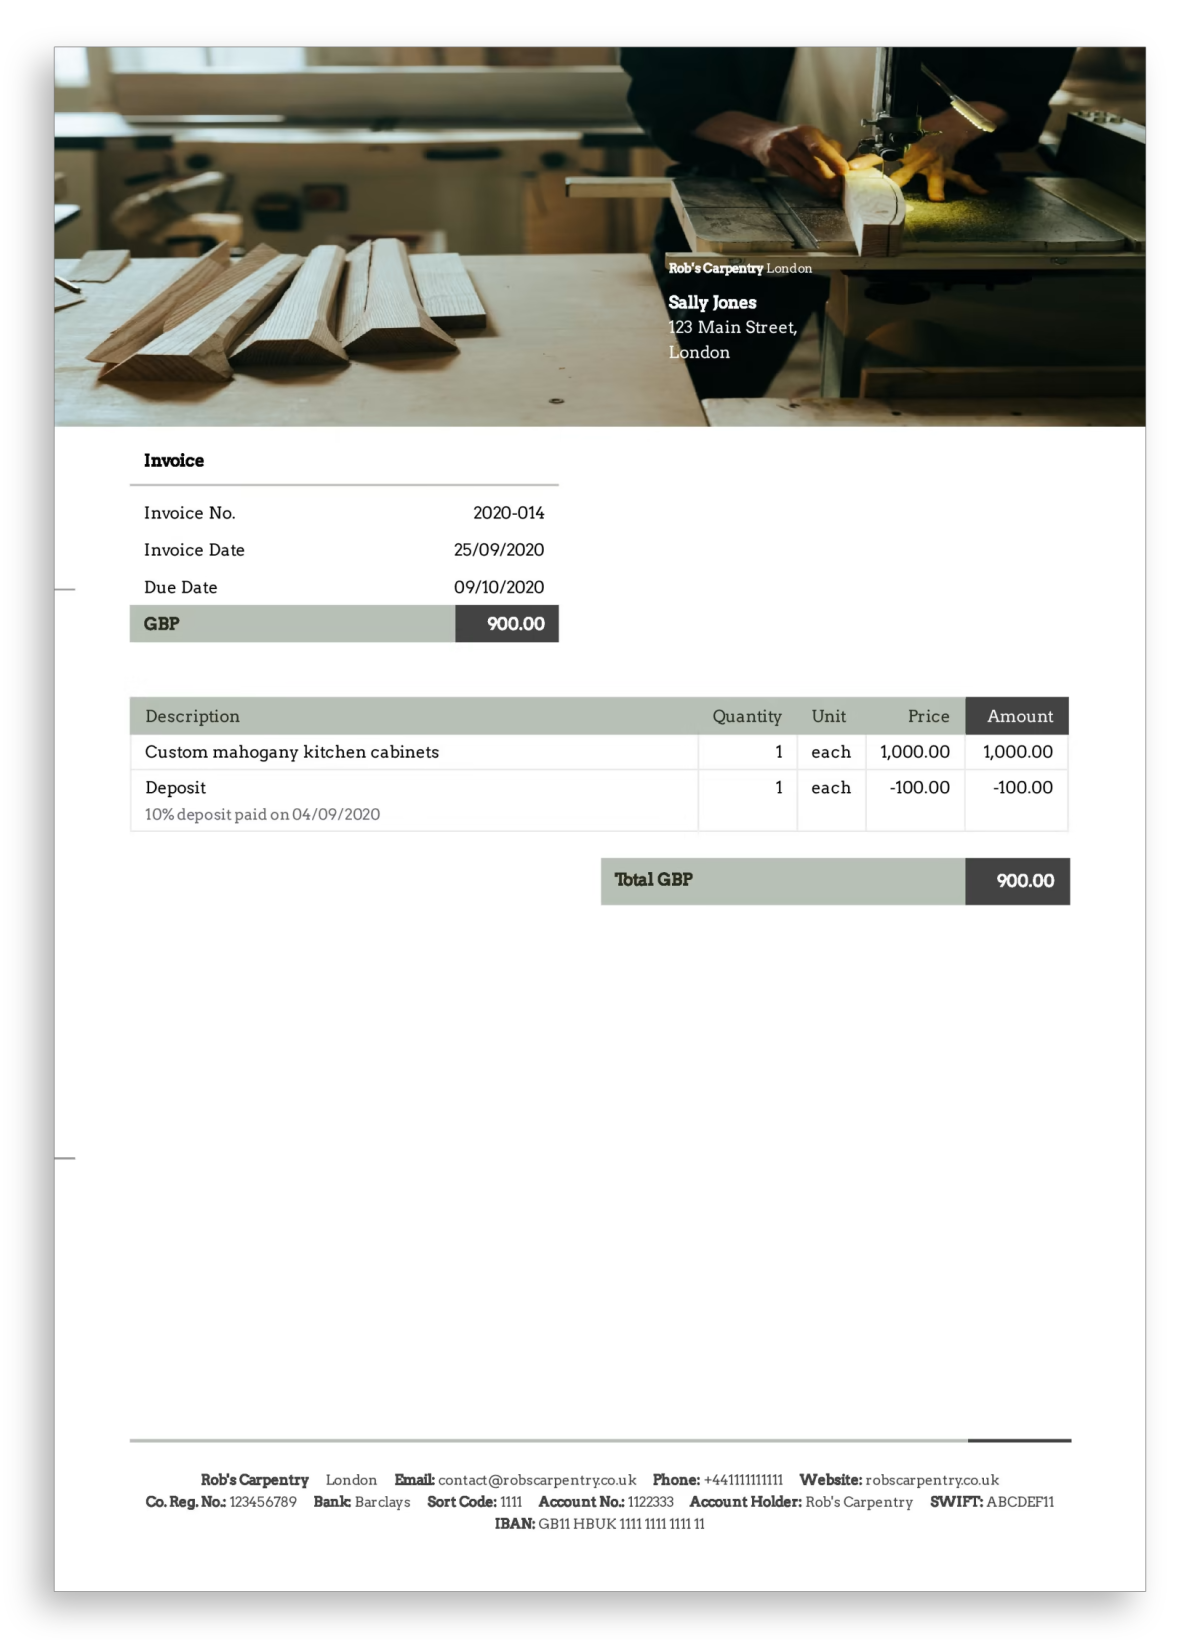 A sample carpenter invoice with all the required invoice fields and a customised design.